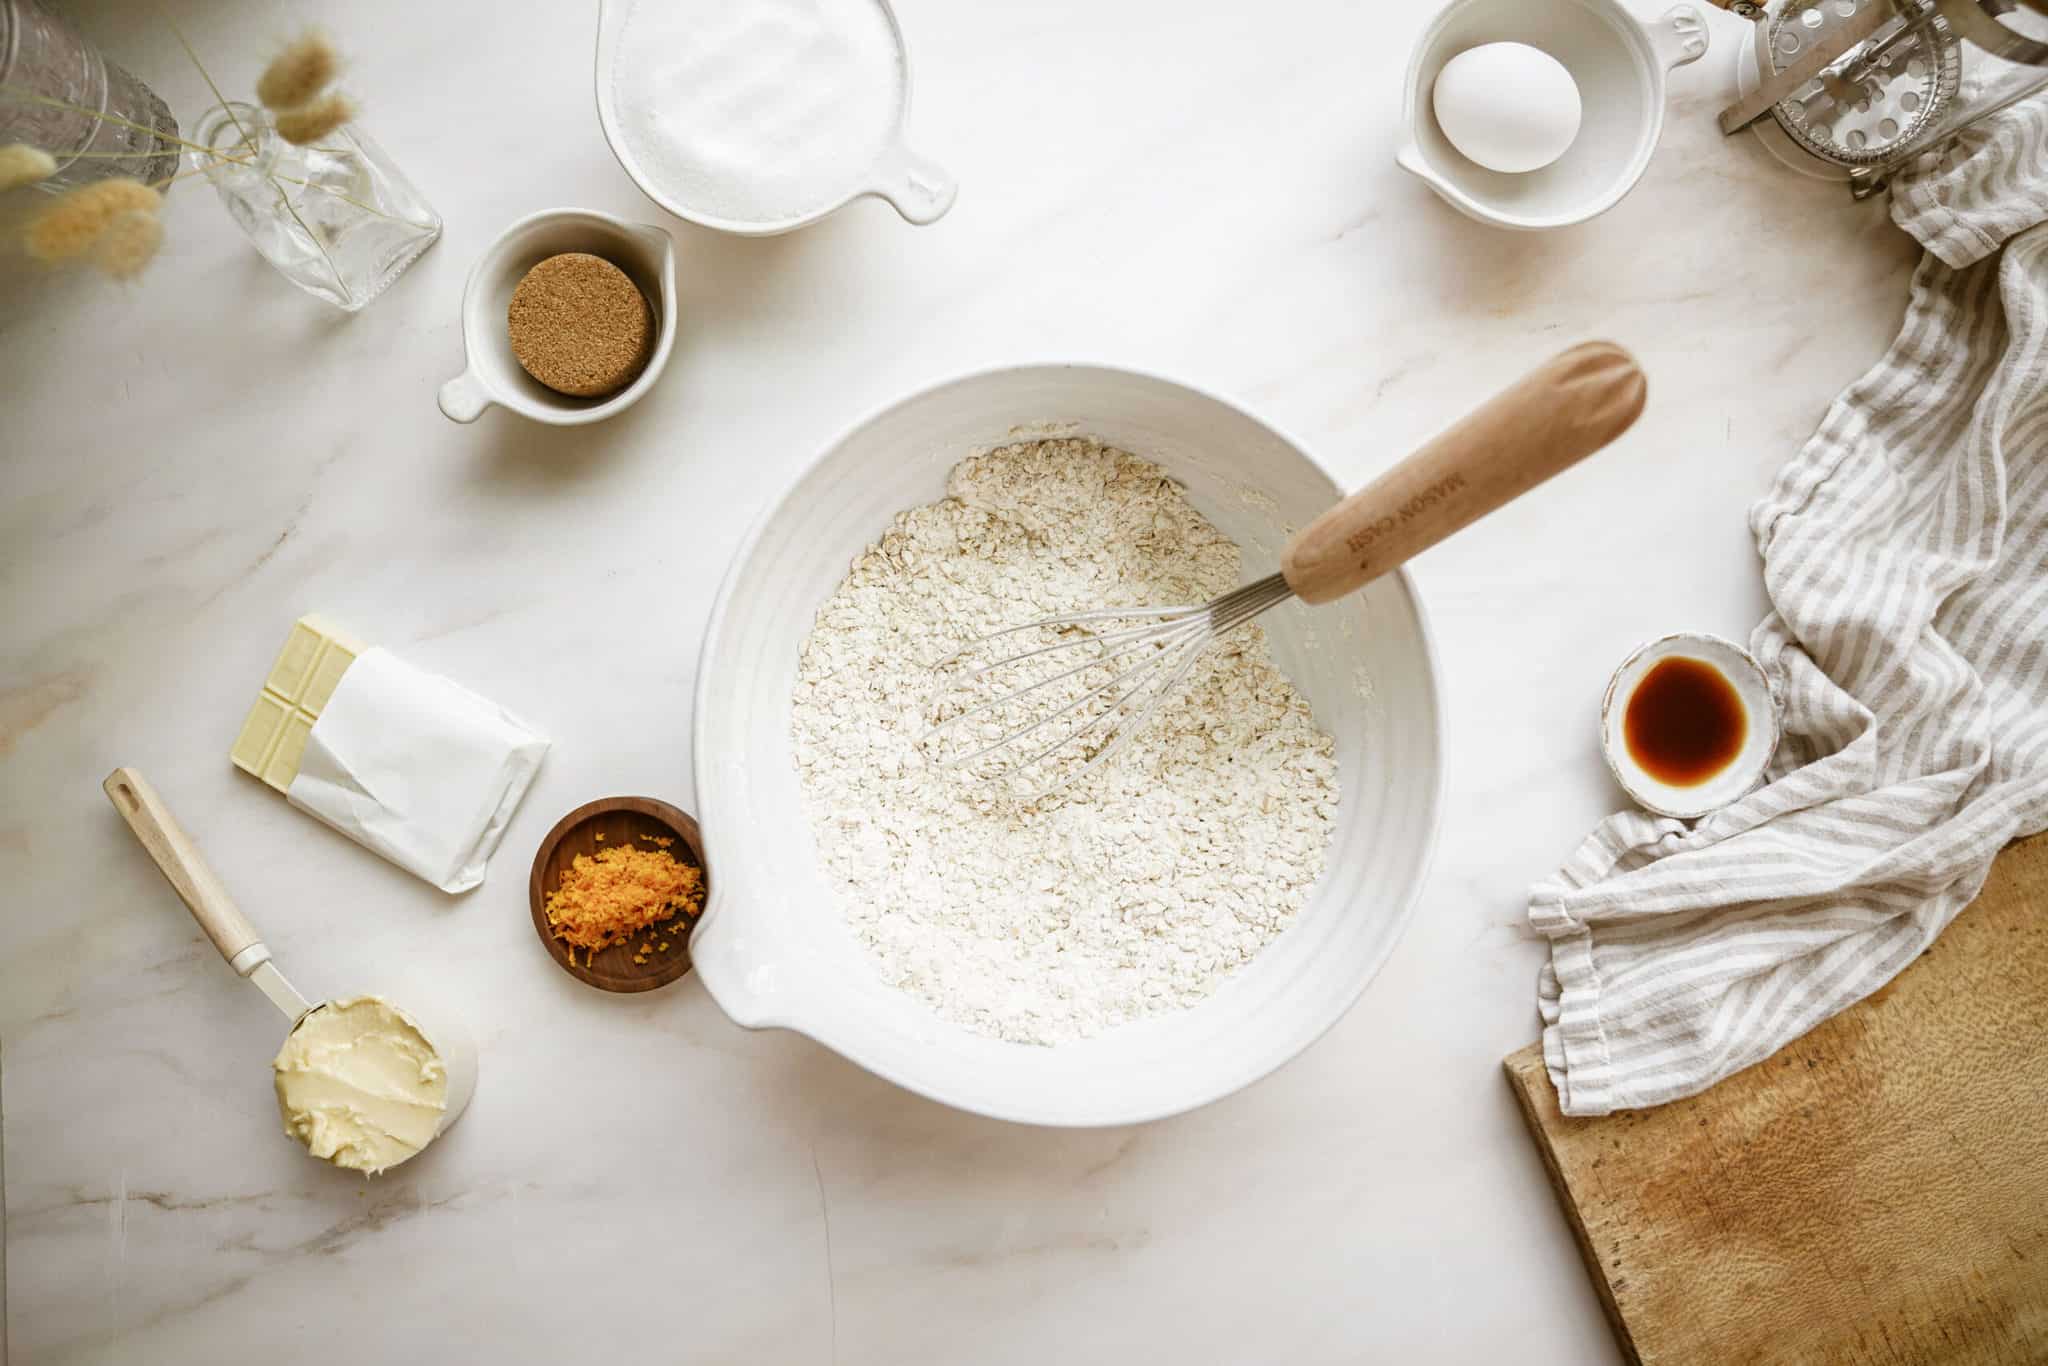 Dry ingredients in a mixing bowl for White Chocolate Oatmeal Cookies